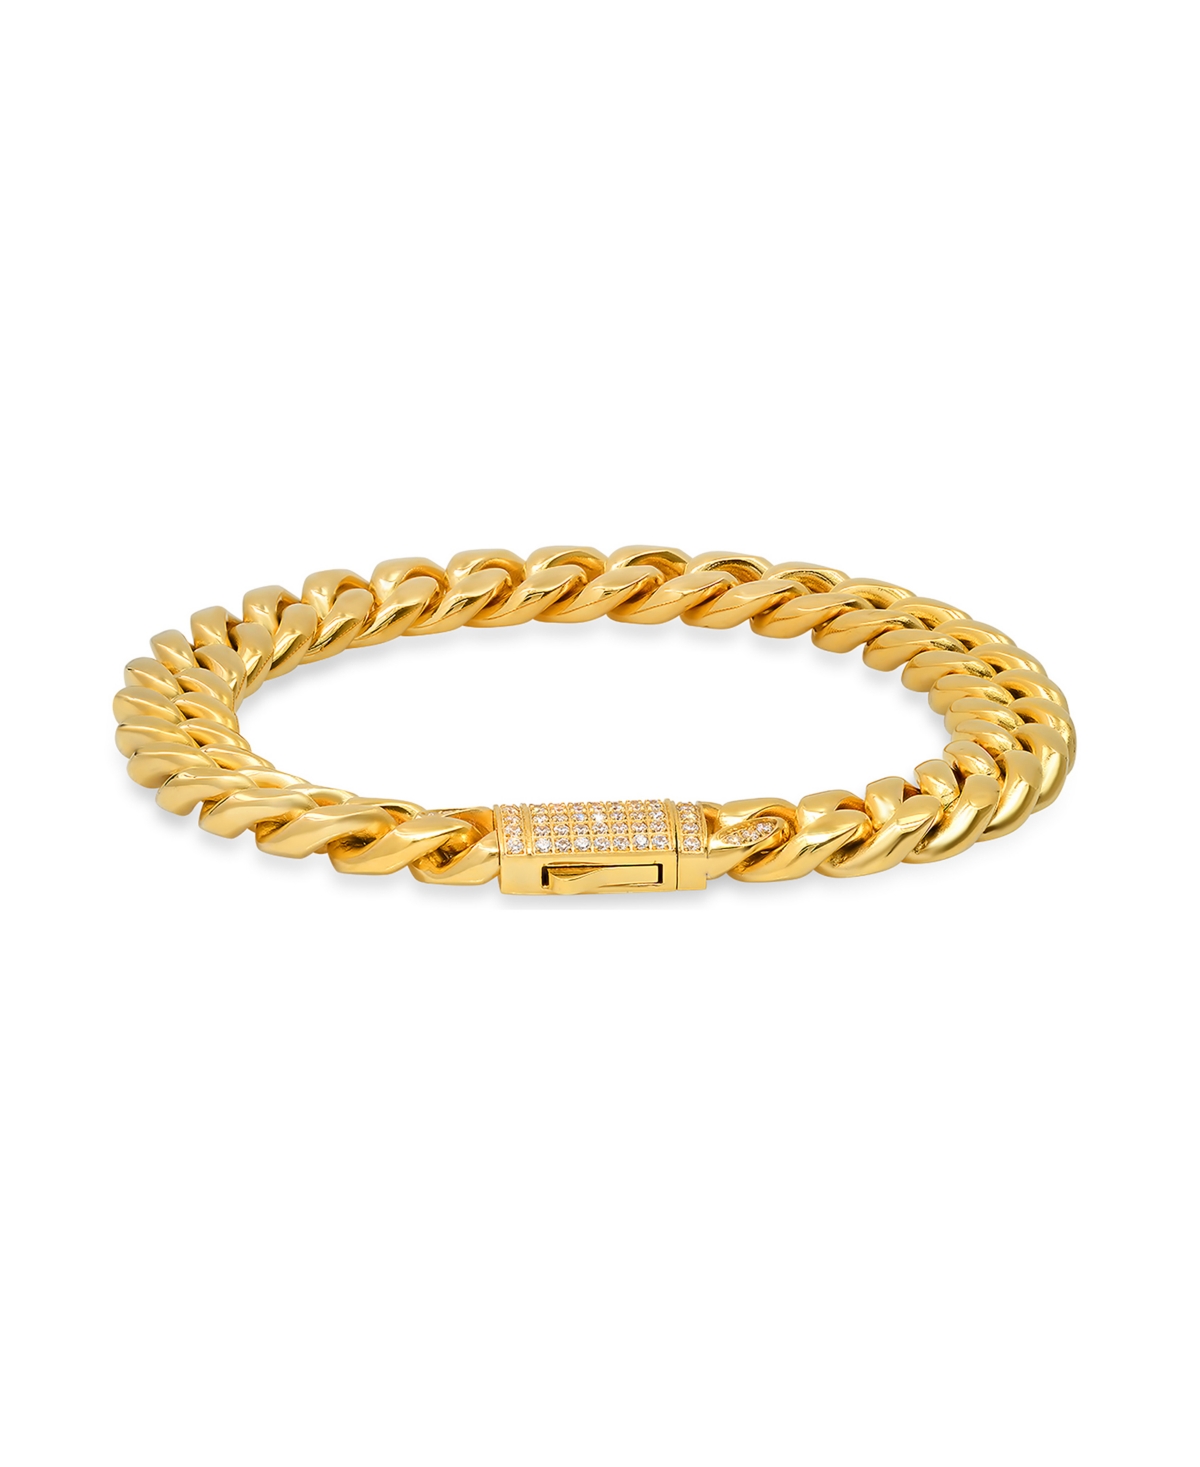 Men's 18k Gold Plated Stainless Steel Thick Cuban Link Chain Bracelet with Simulated Diamonds Clasp - Gold Plated